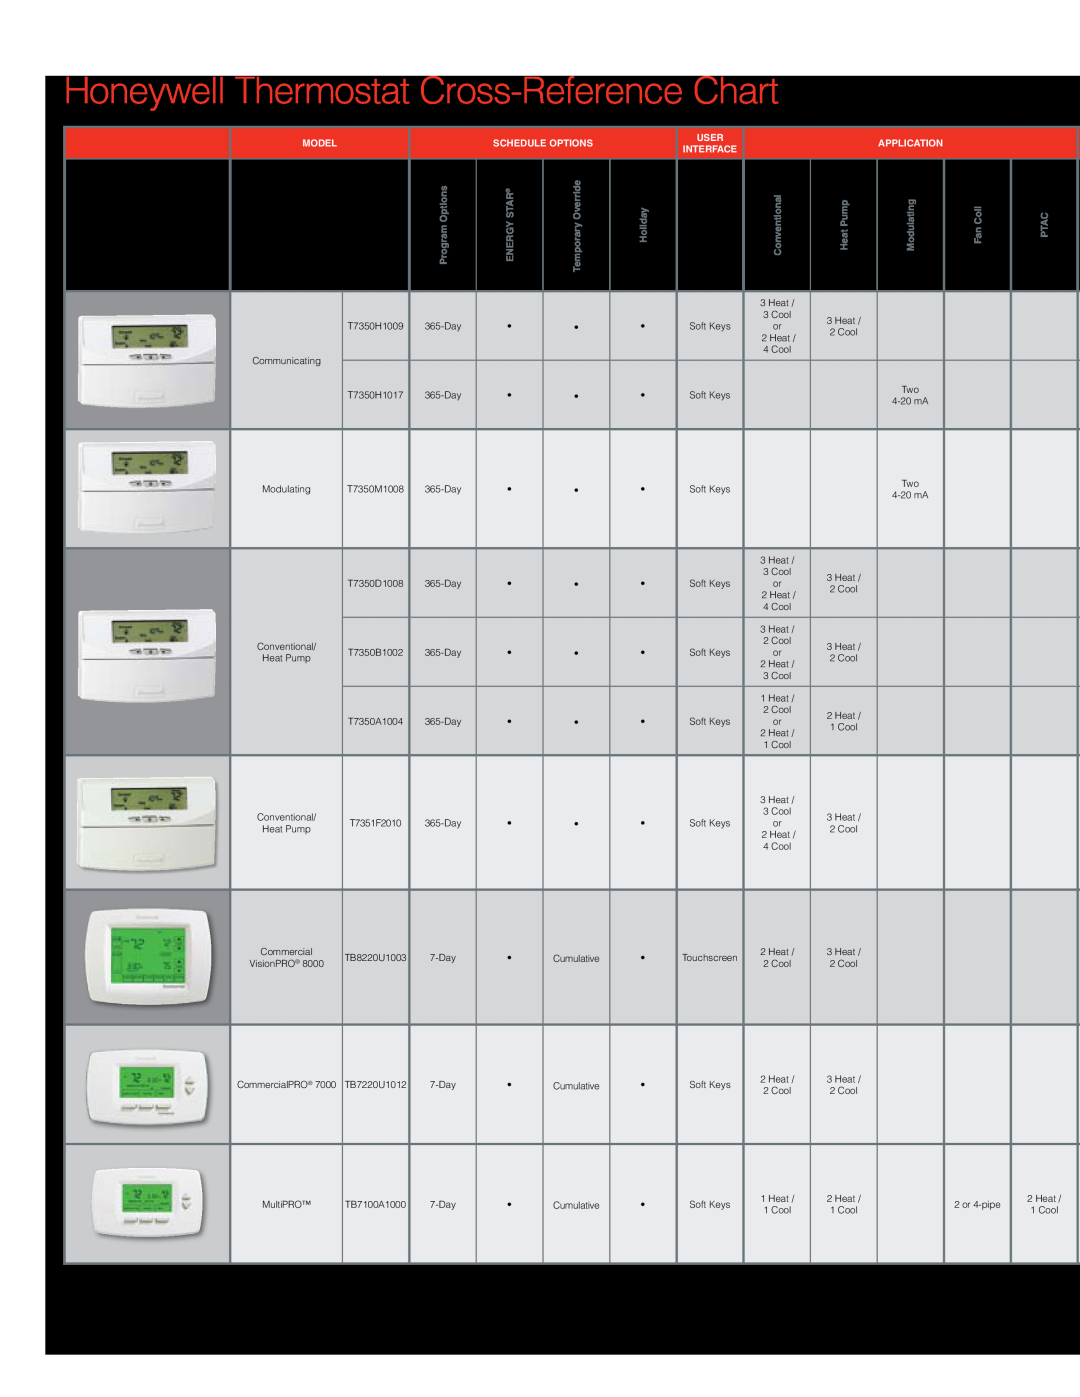 White Rodgers T7350 Honeywell Thermostat Cross-ReferenceChart, Model, Schedule Options, User, Application, Interface, Ptac 